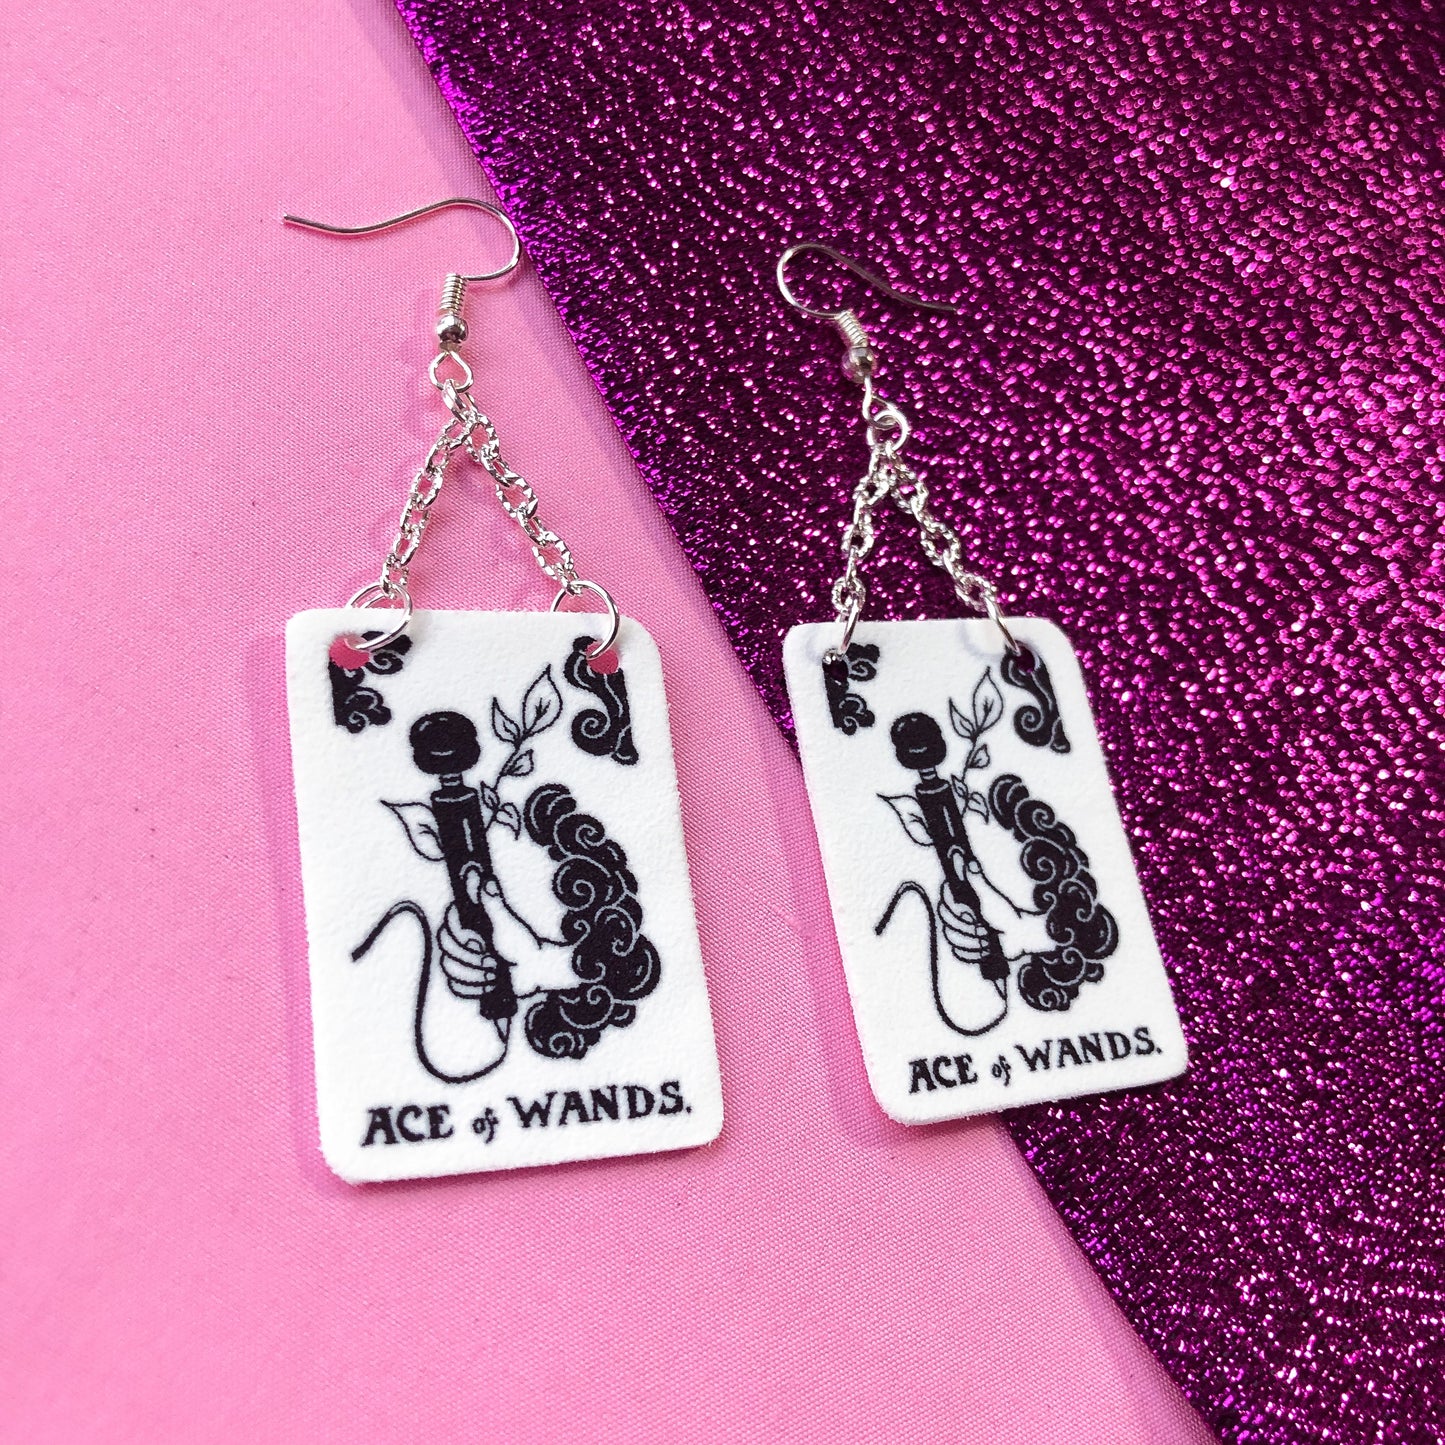 Black and white tarot card earrings. Original design based on Ace of Wands tarot card. A hand is coming out a cloud and holding a vibrator with the text ACE OF WANDS beneath